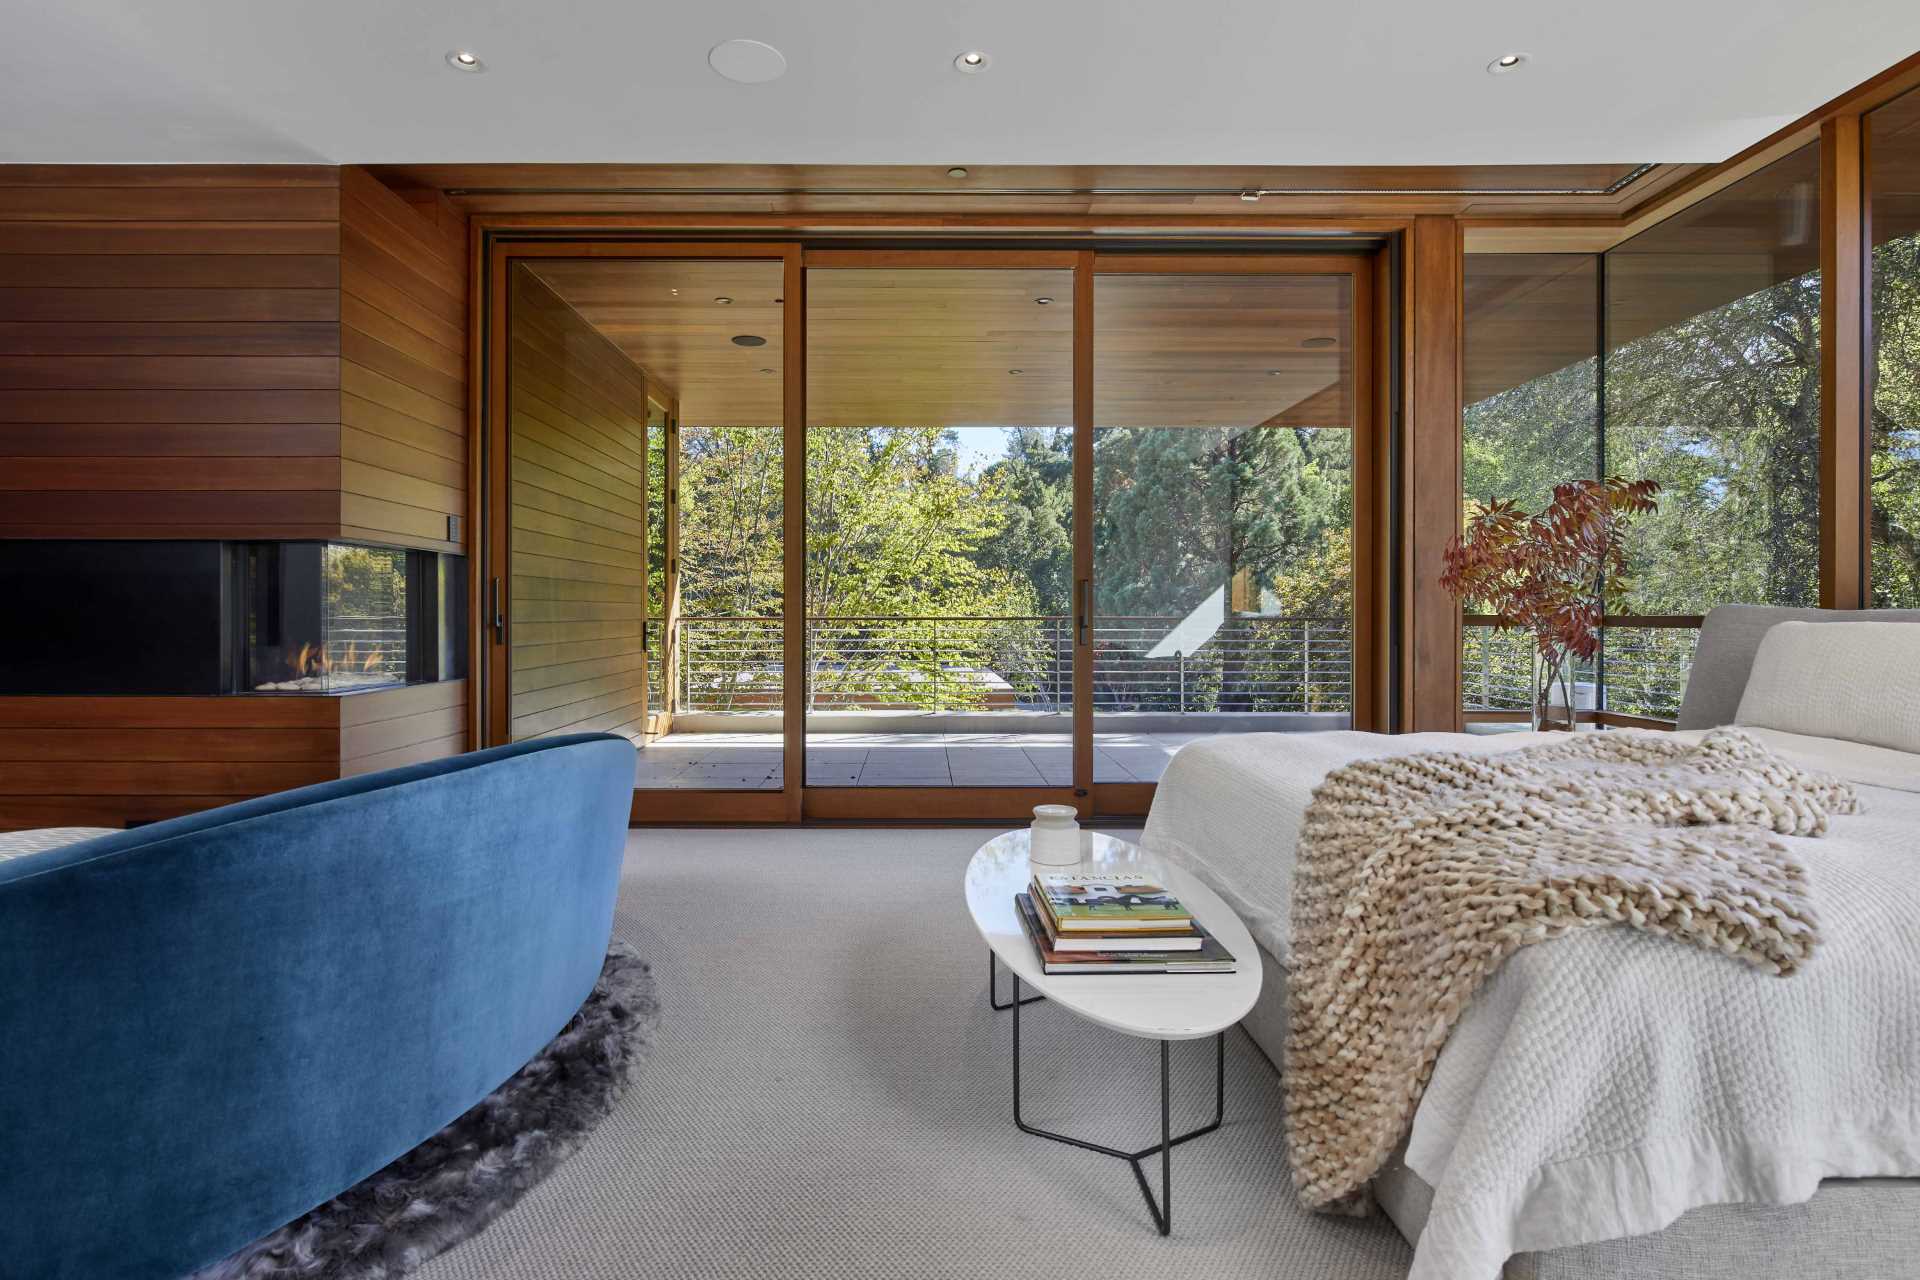 In this primary bedroom, glass walls provide a view of the trees, and a sliding glass door opens to a private balcony.